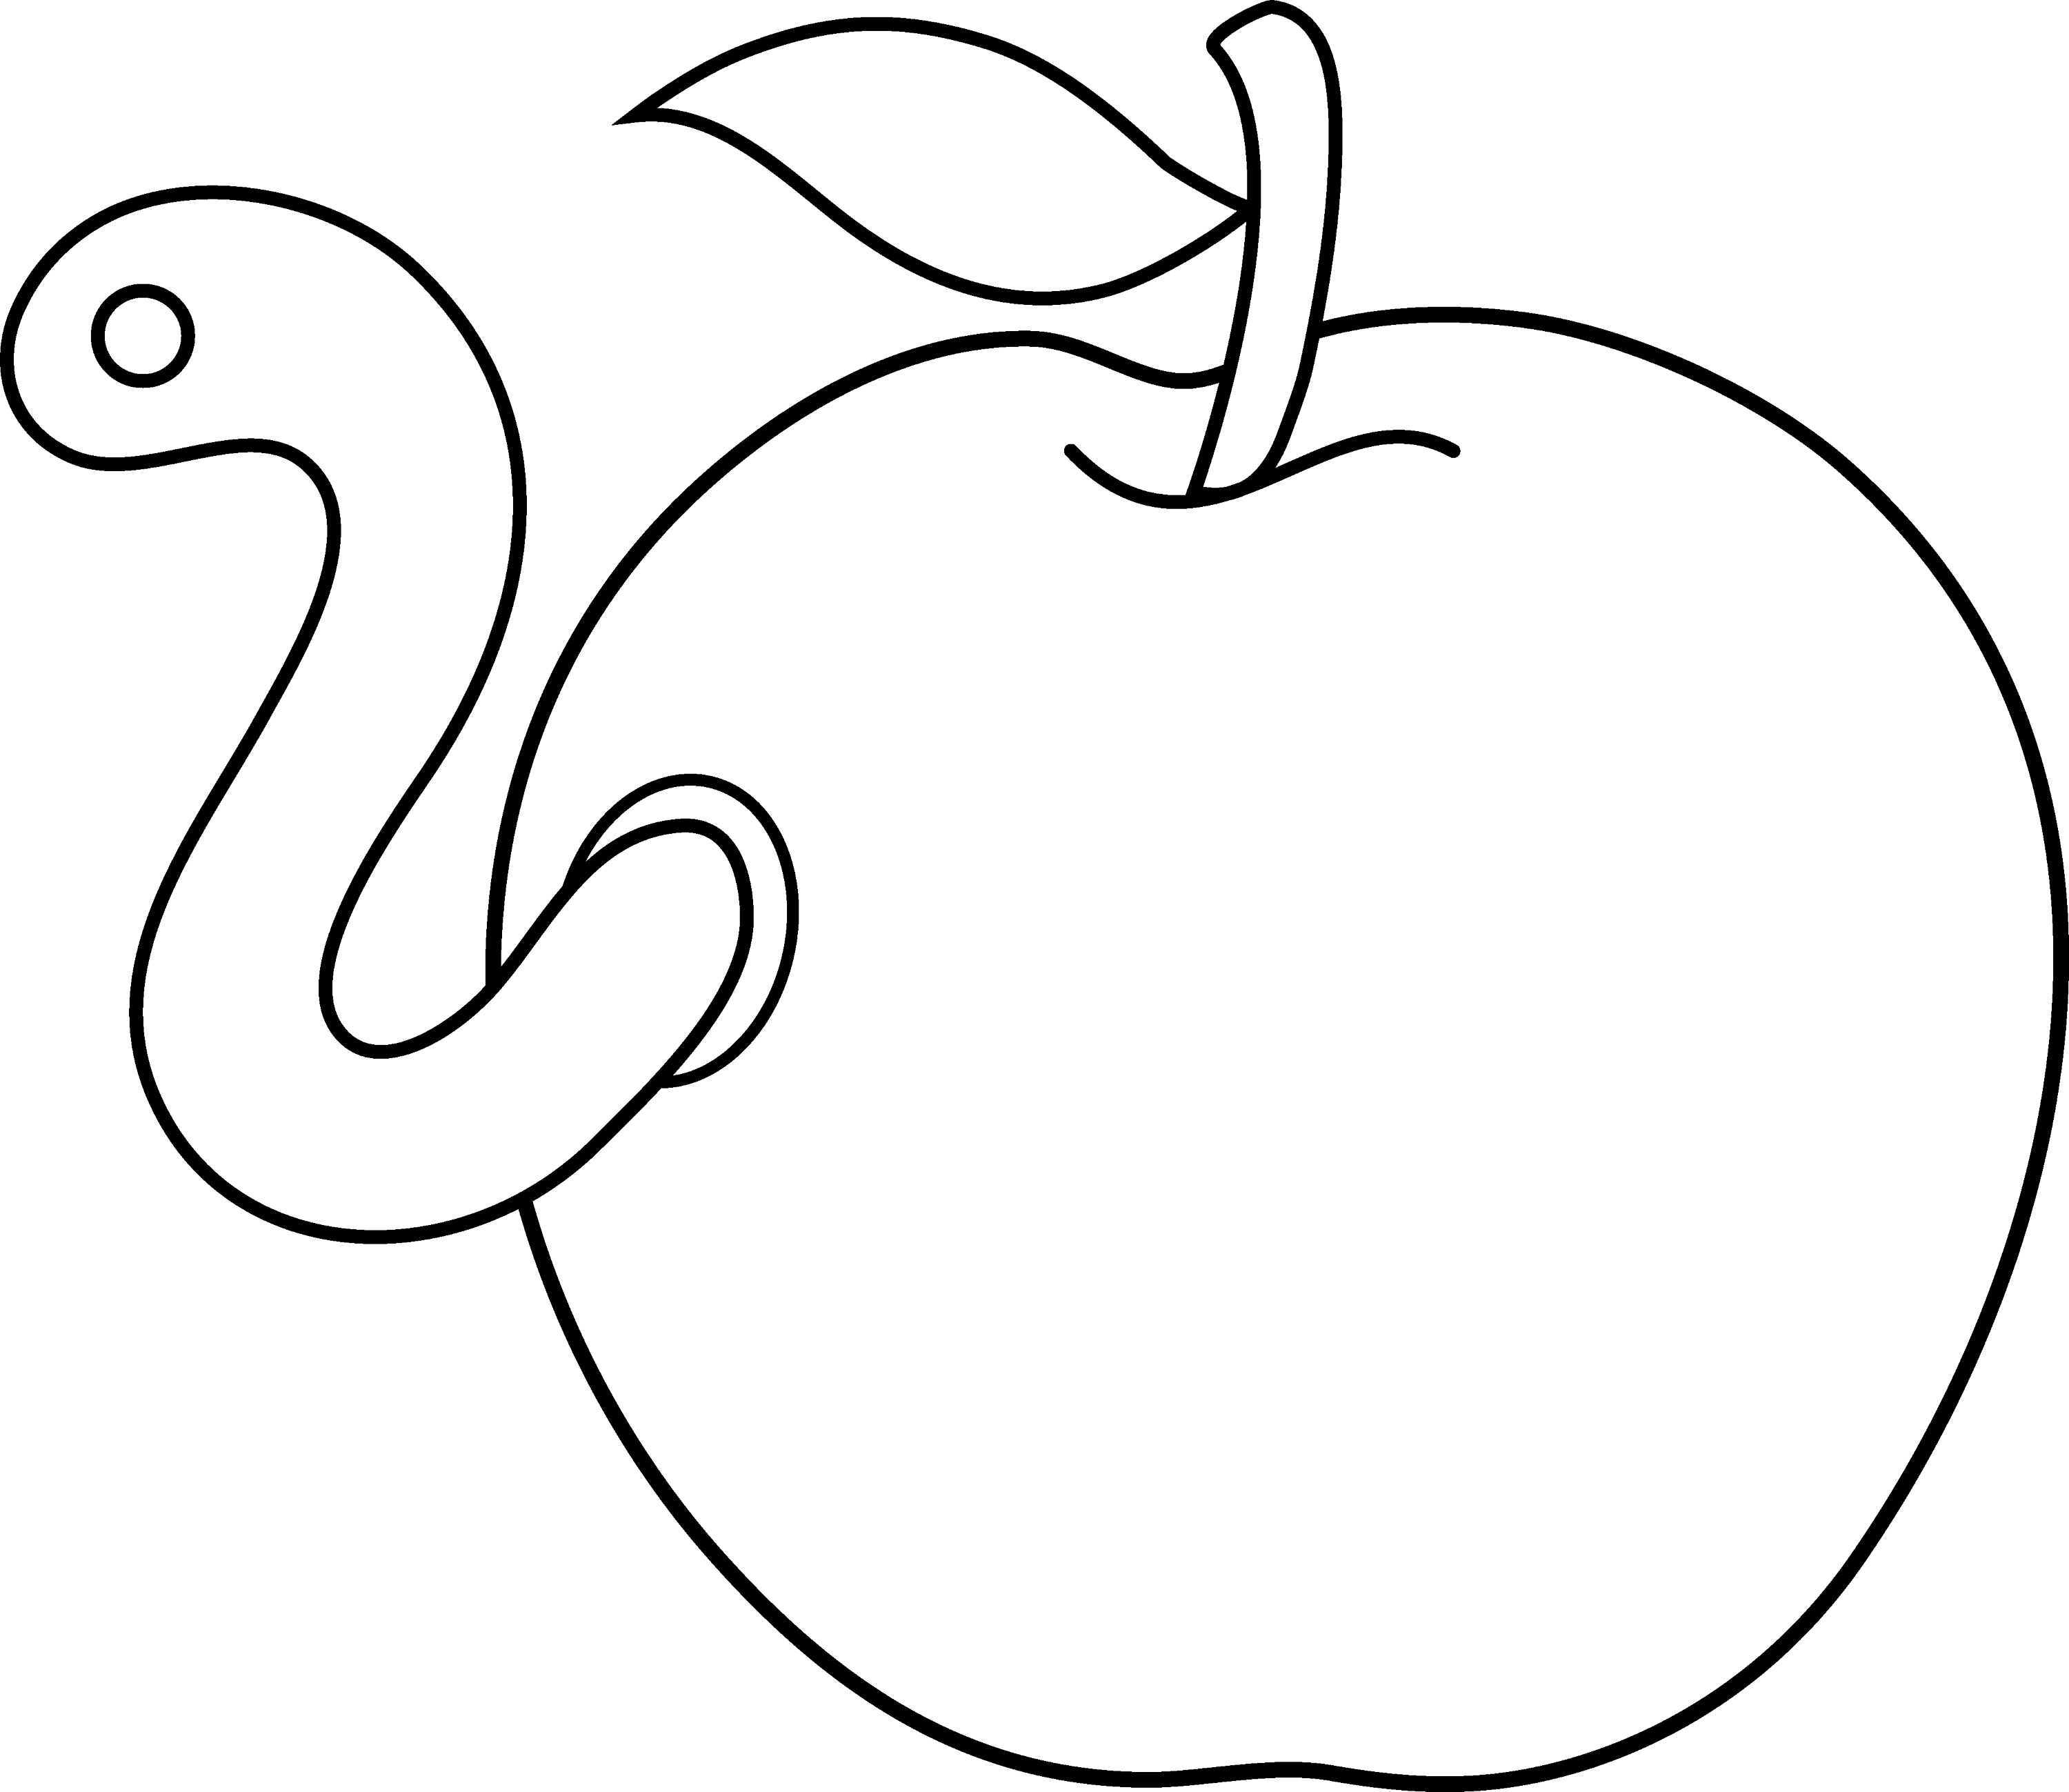 Download Worm in Apple Coloring Page - Free Clip Art